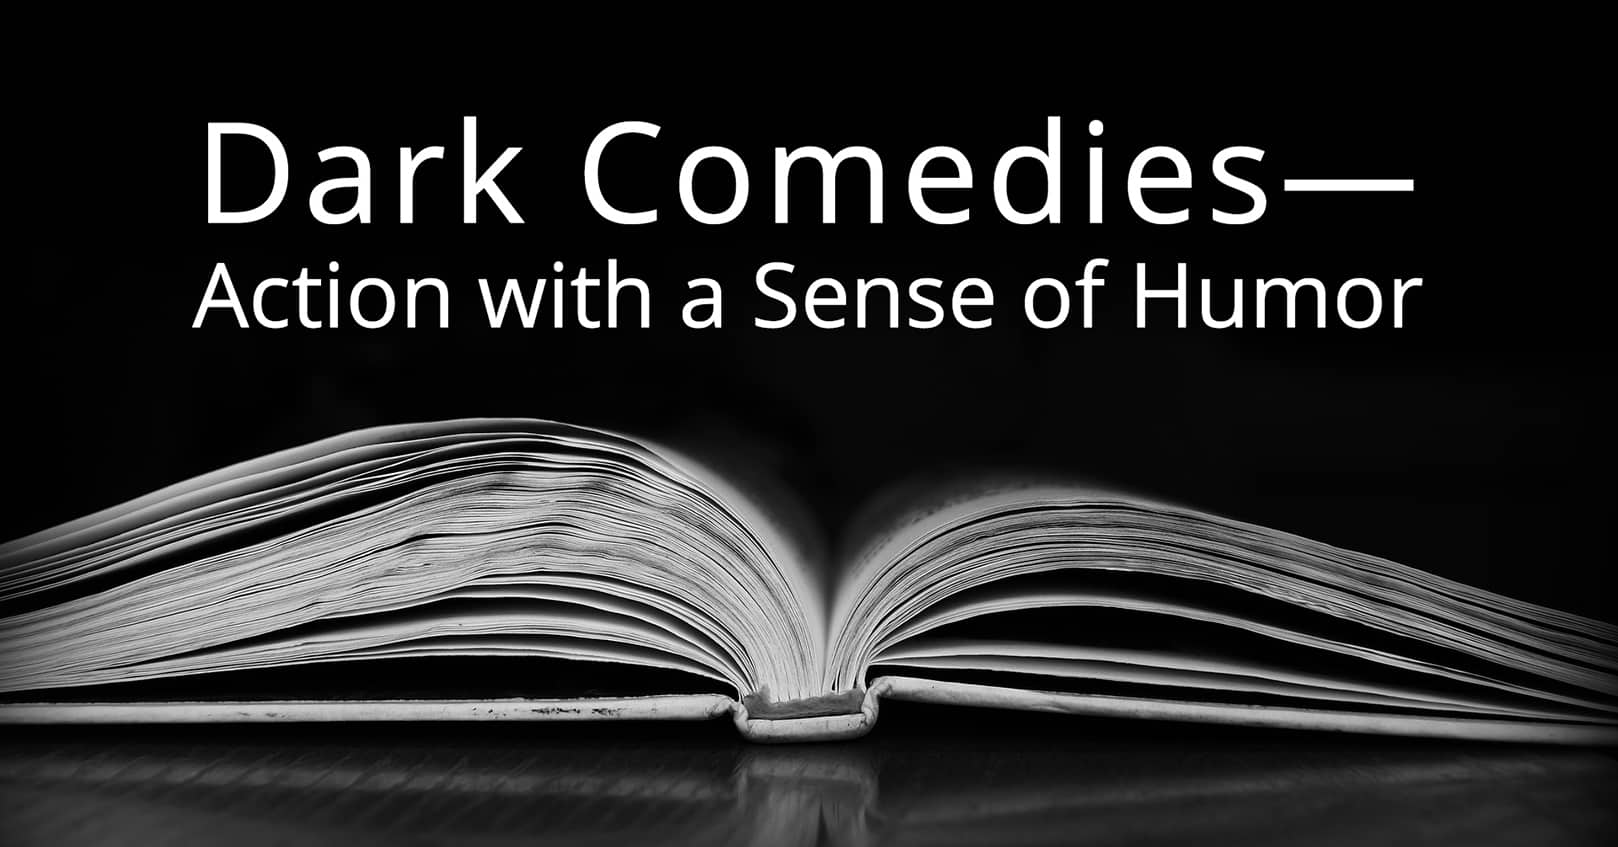 dark comedies - action with a sense of humor